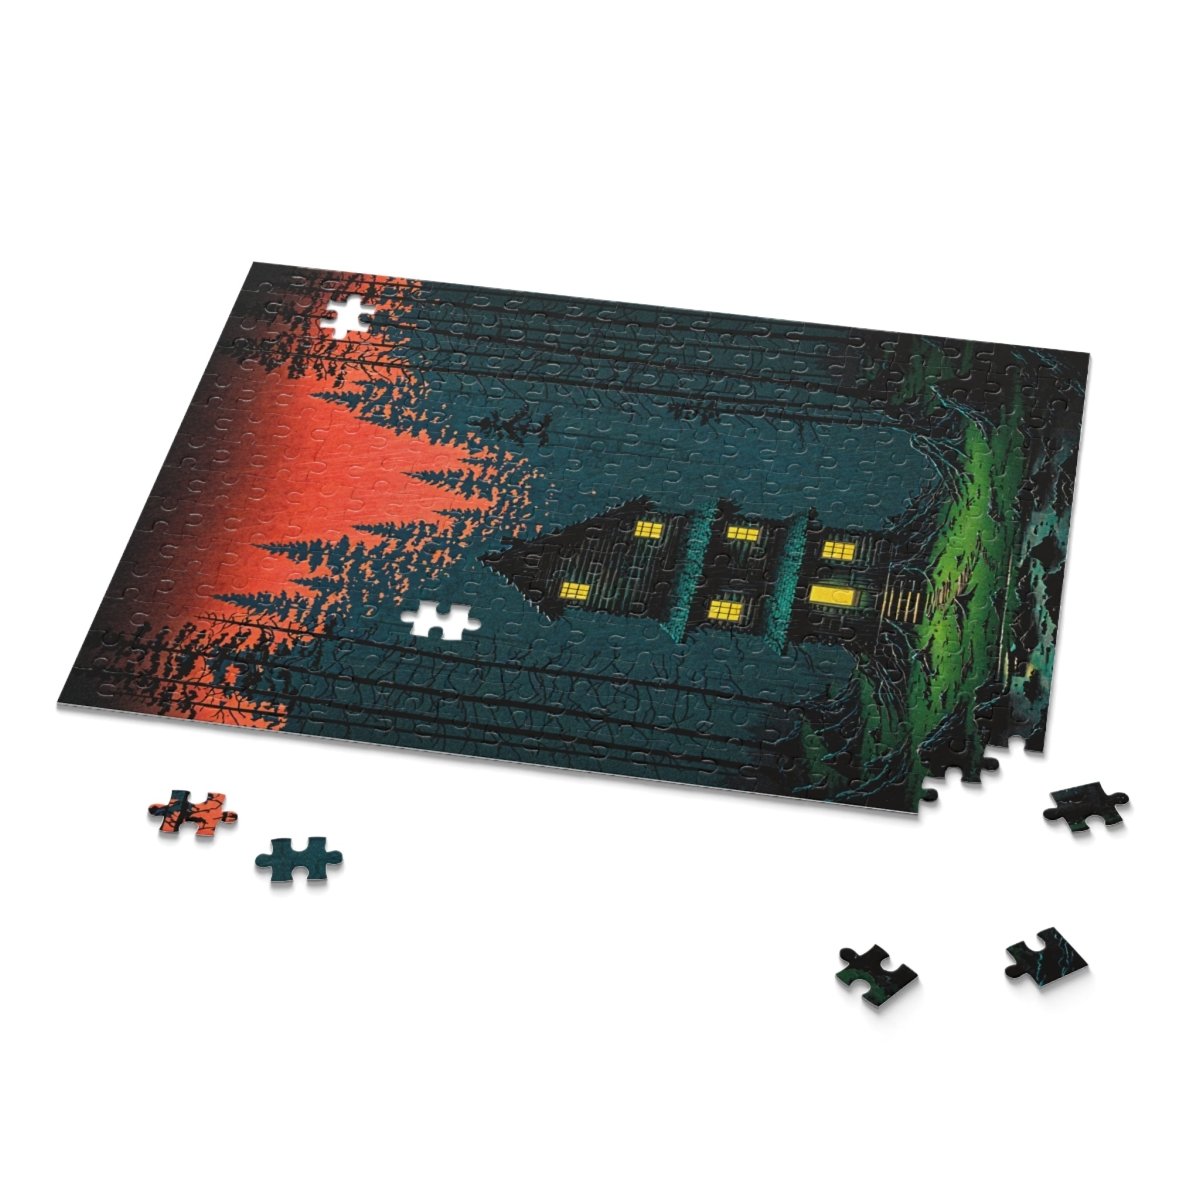 Inky nightmare - Puzzle - Puzzle - Ever colorful